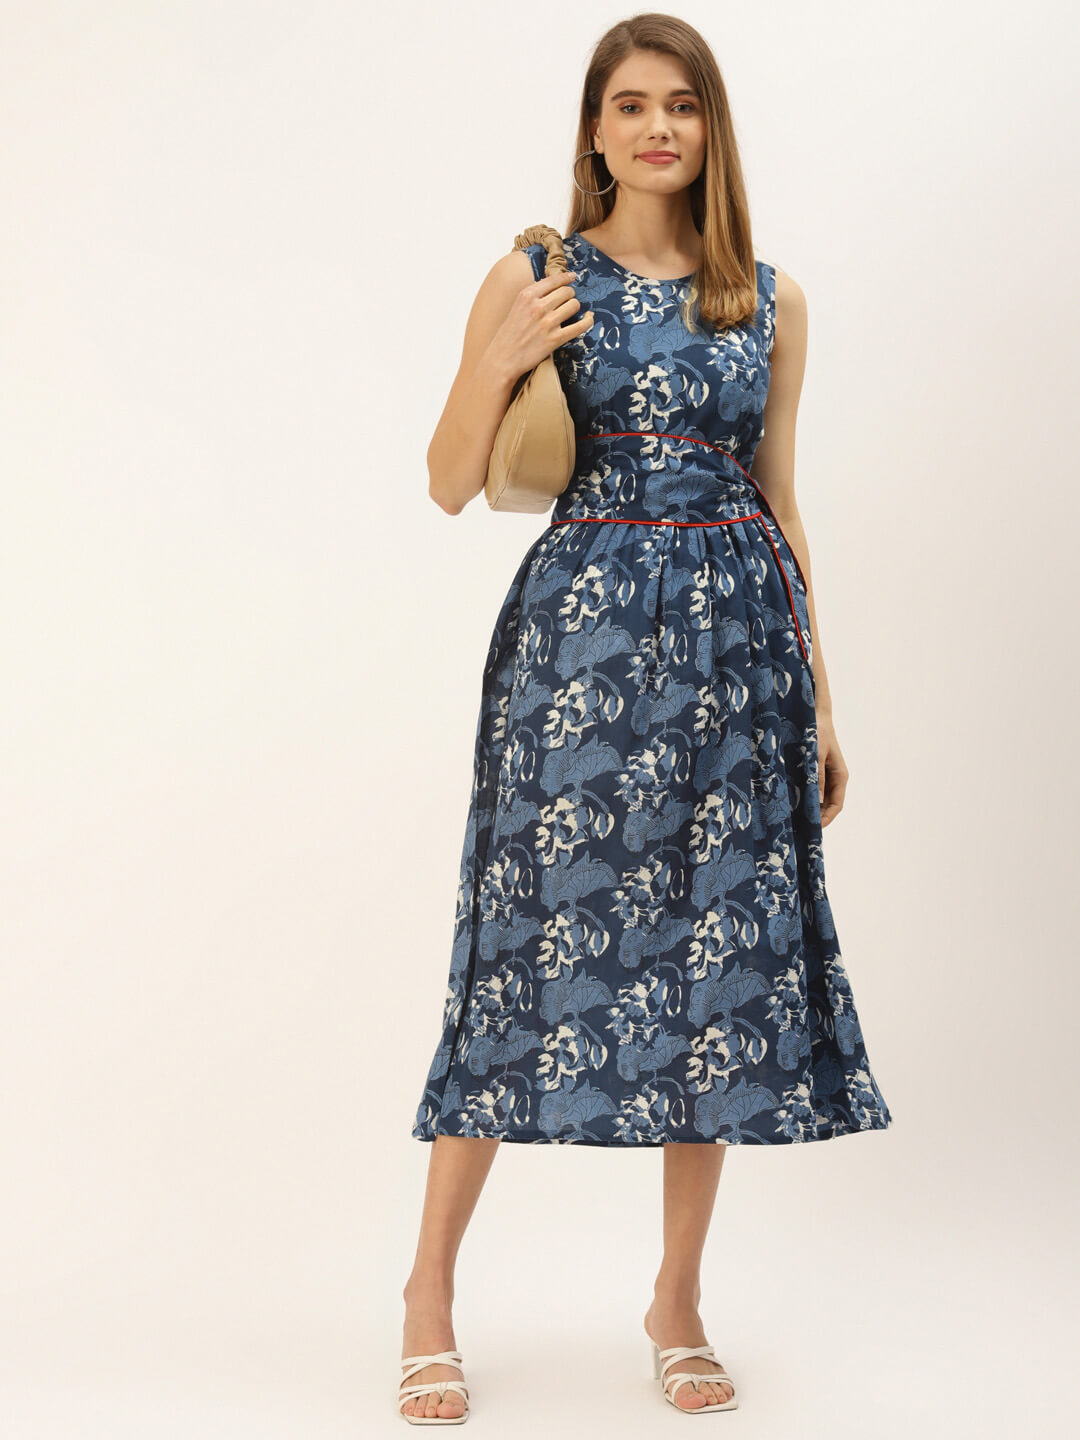 Blue & White Floral Printed Sleeveless Dress With Tie-Up Closure for women 